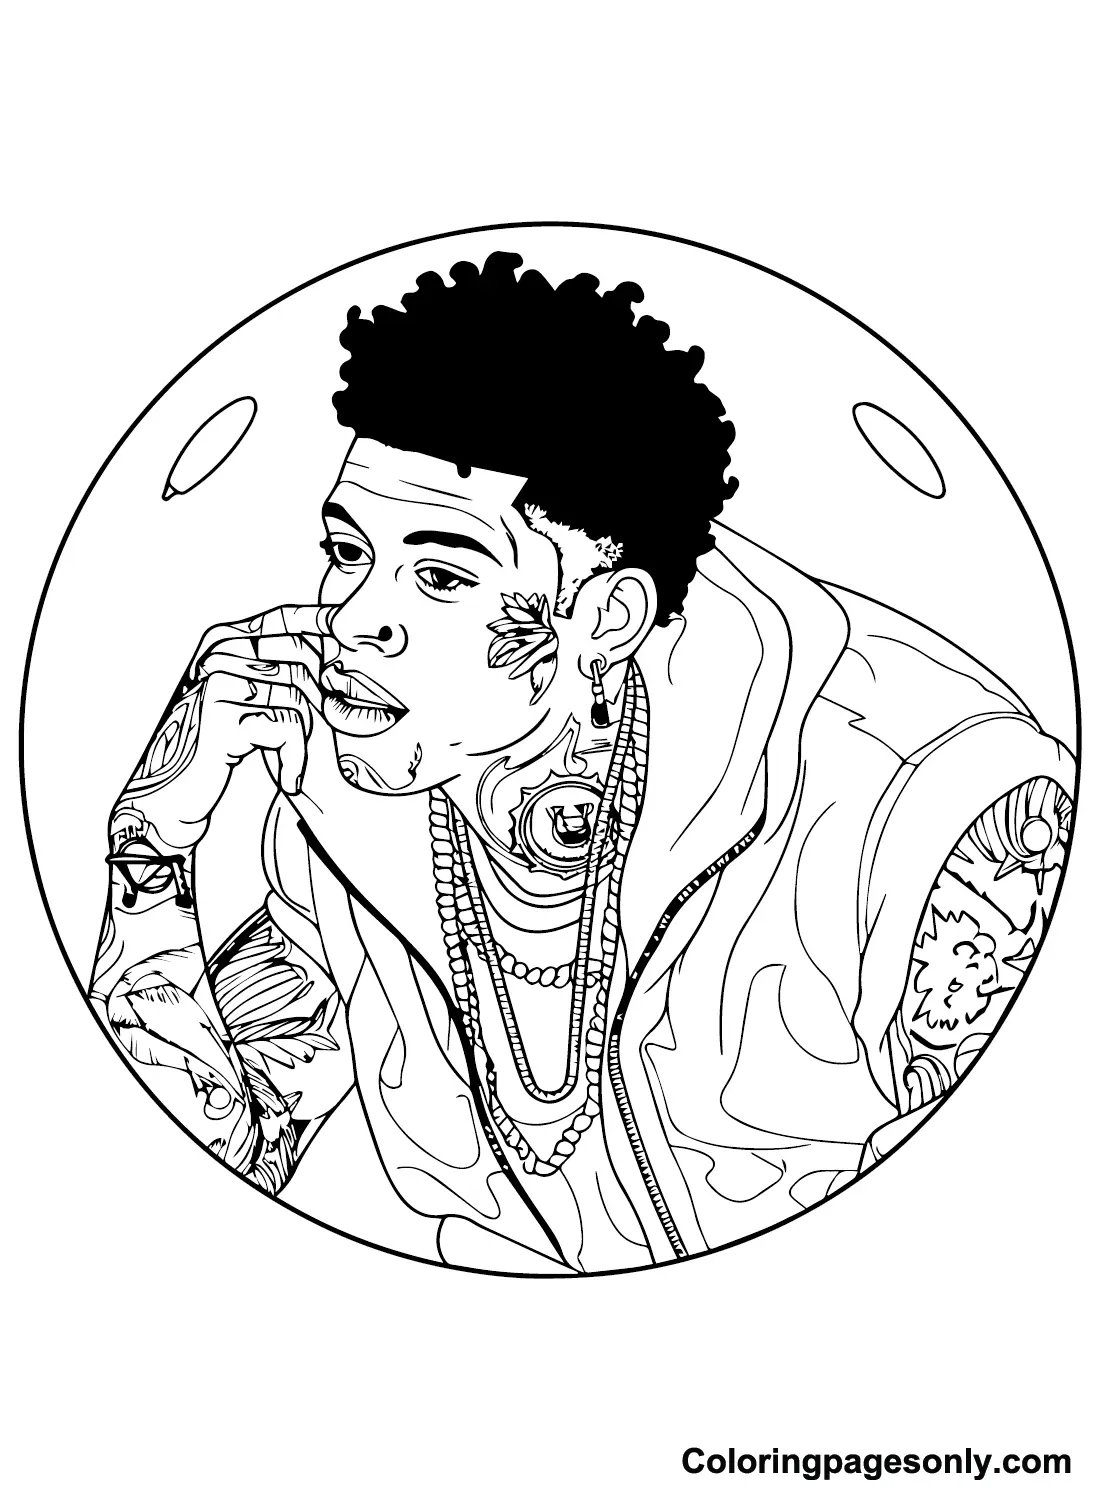 Blueface Coloring Pages